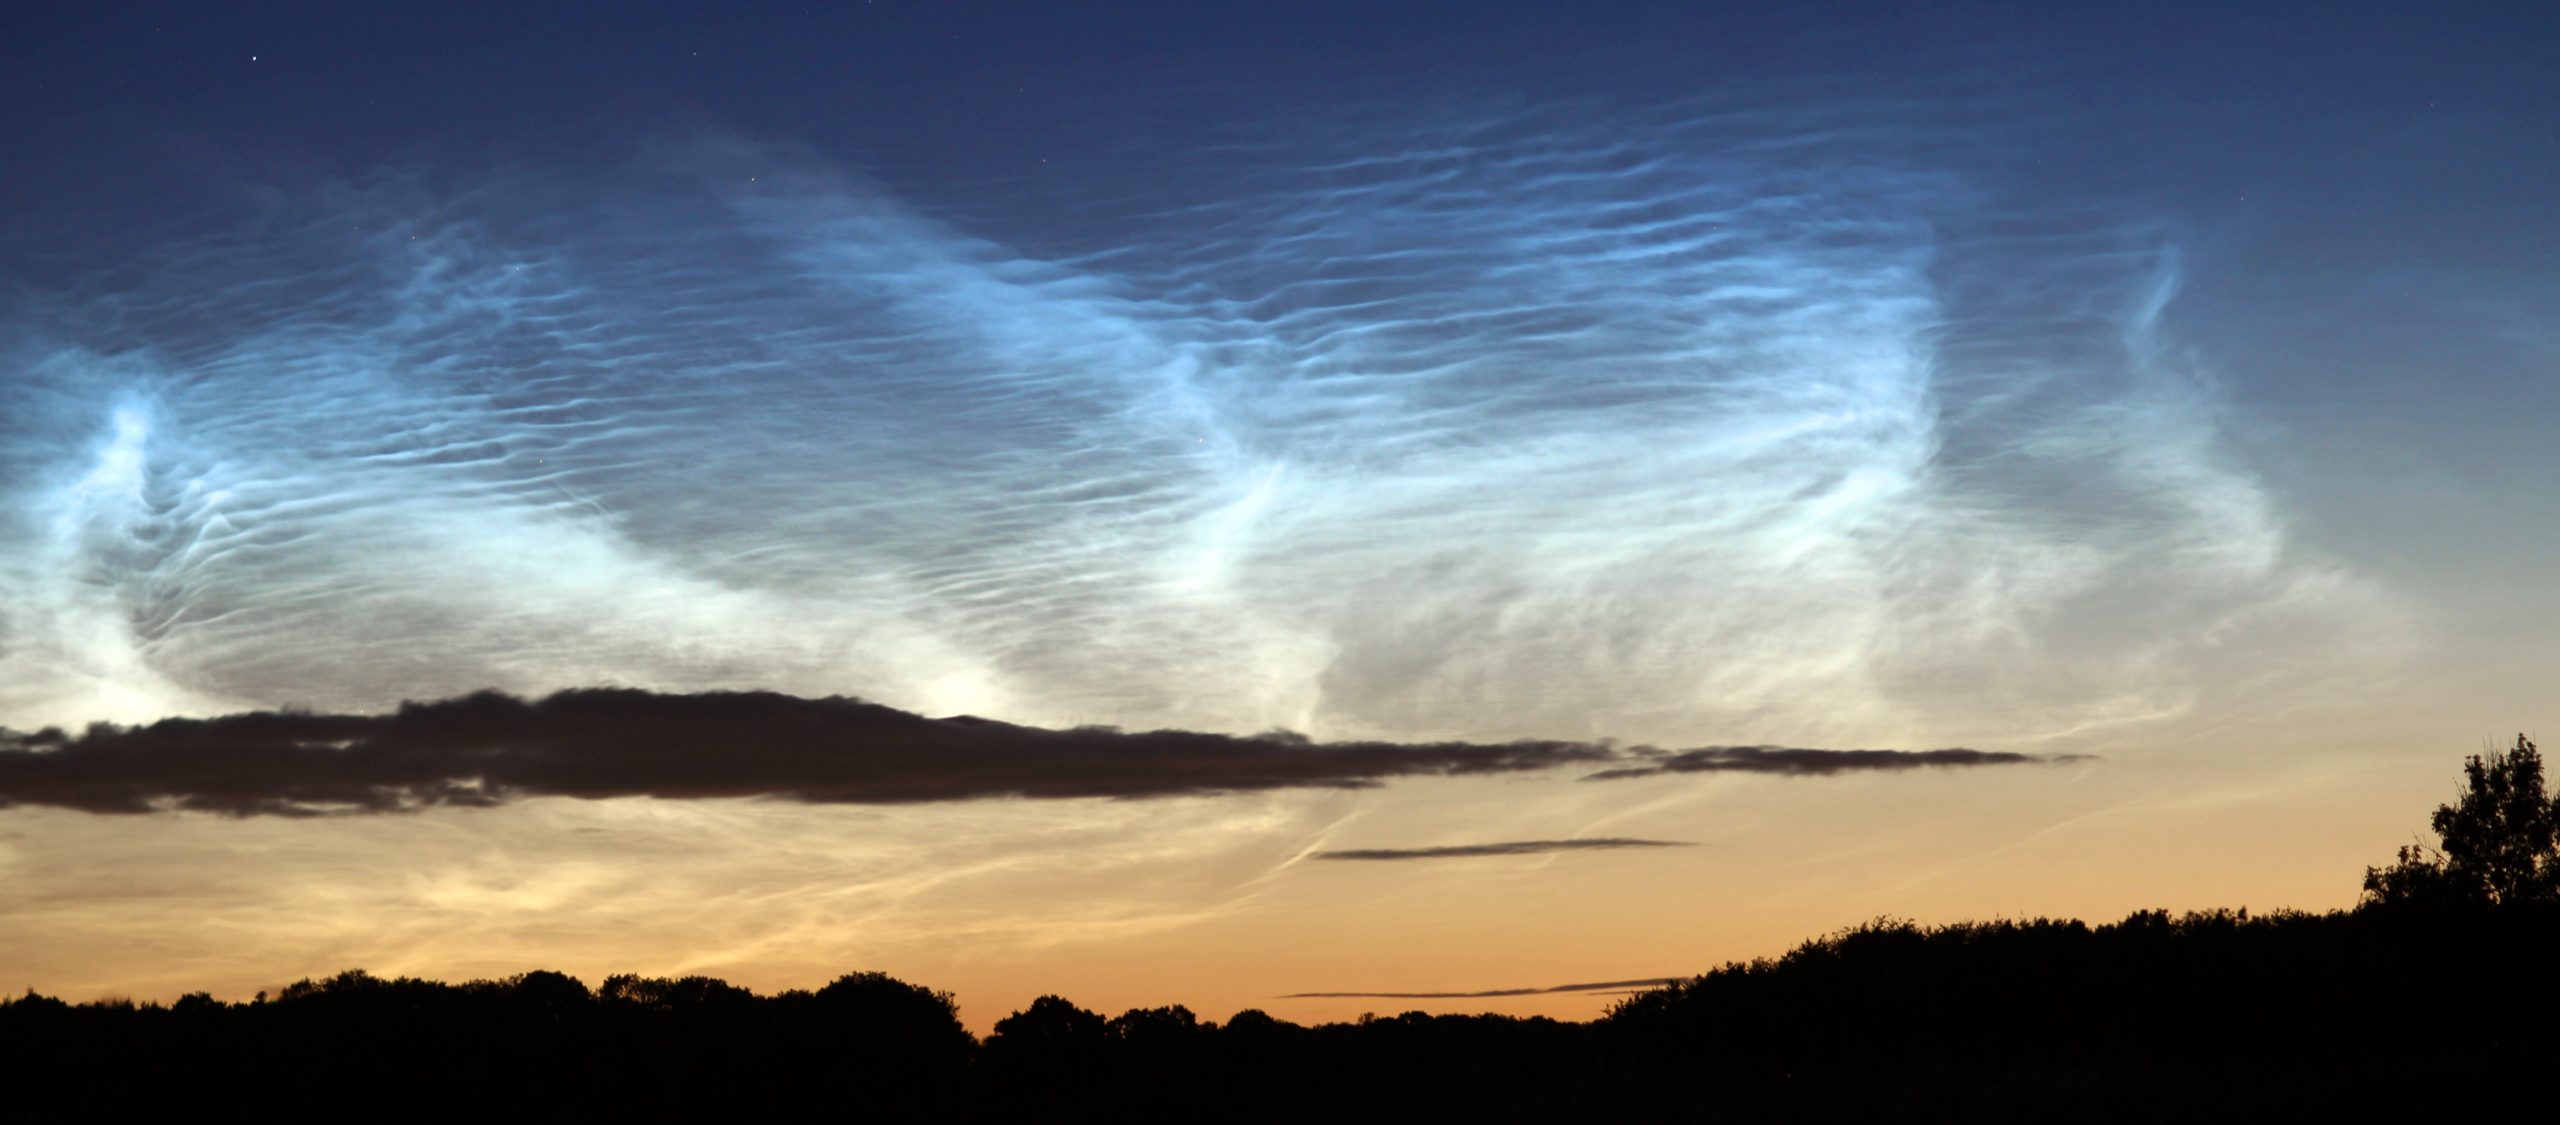 Noctilucent cloud over Cirencester, UK, imaged by James Weightman on 2020 July 10.